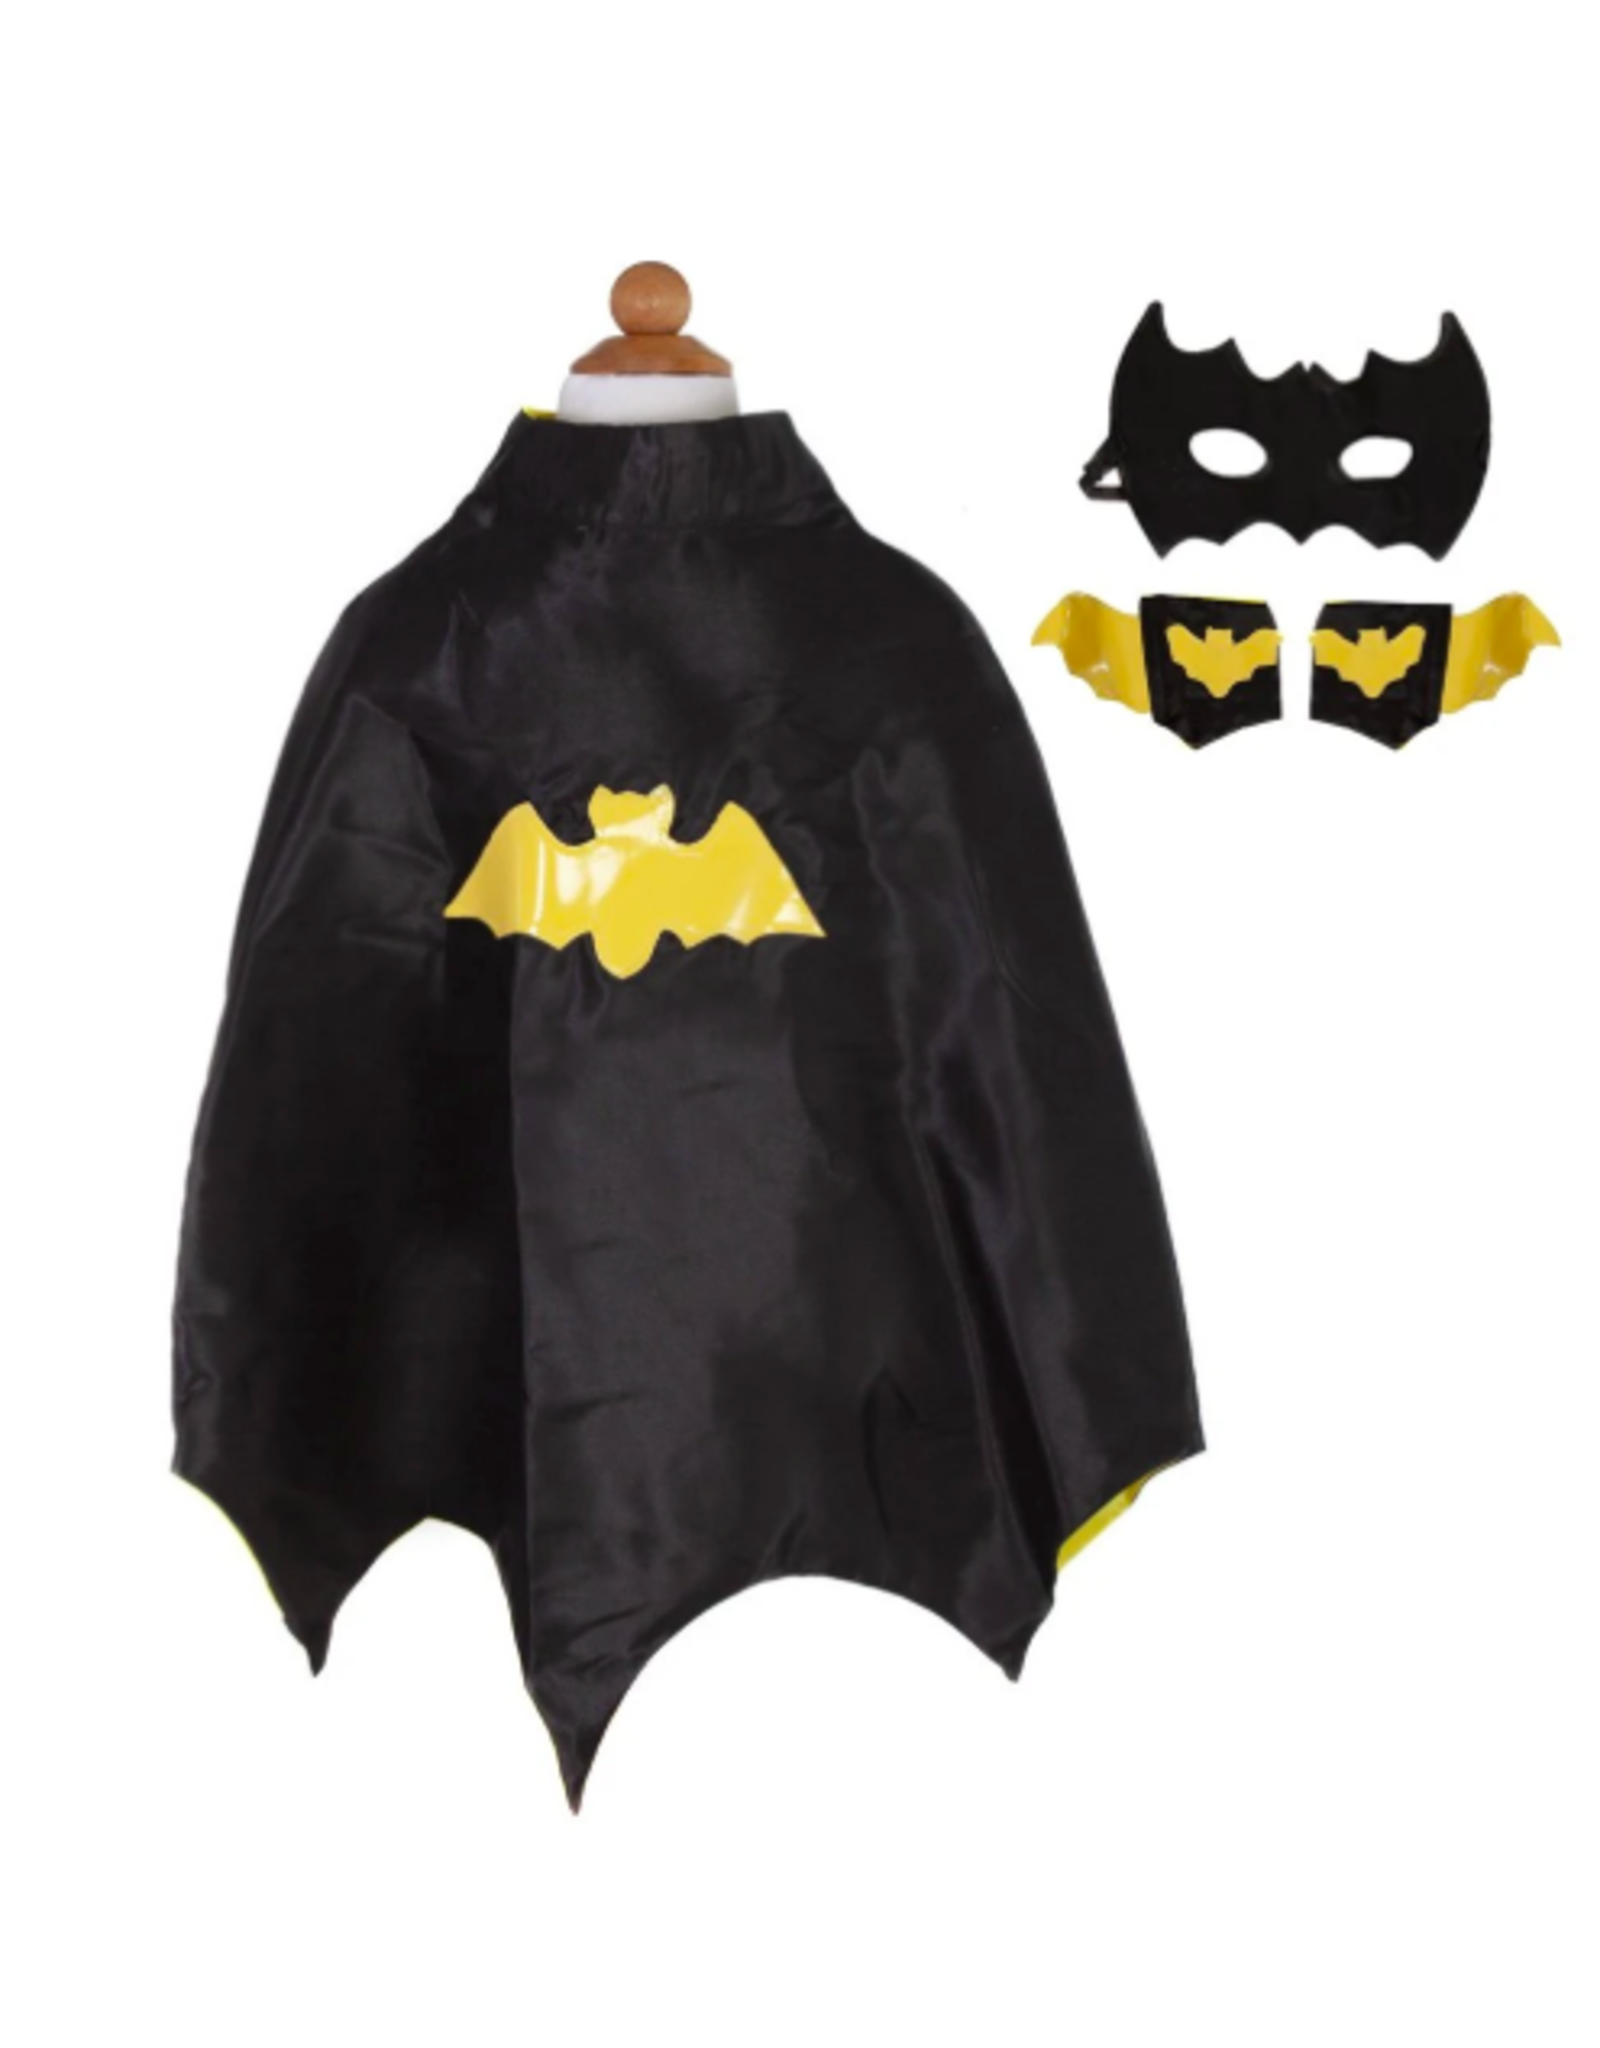 Great Pretenders Bat Cape Set with Mask and Wristbands